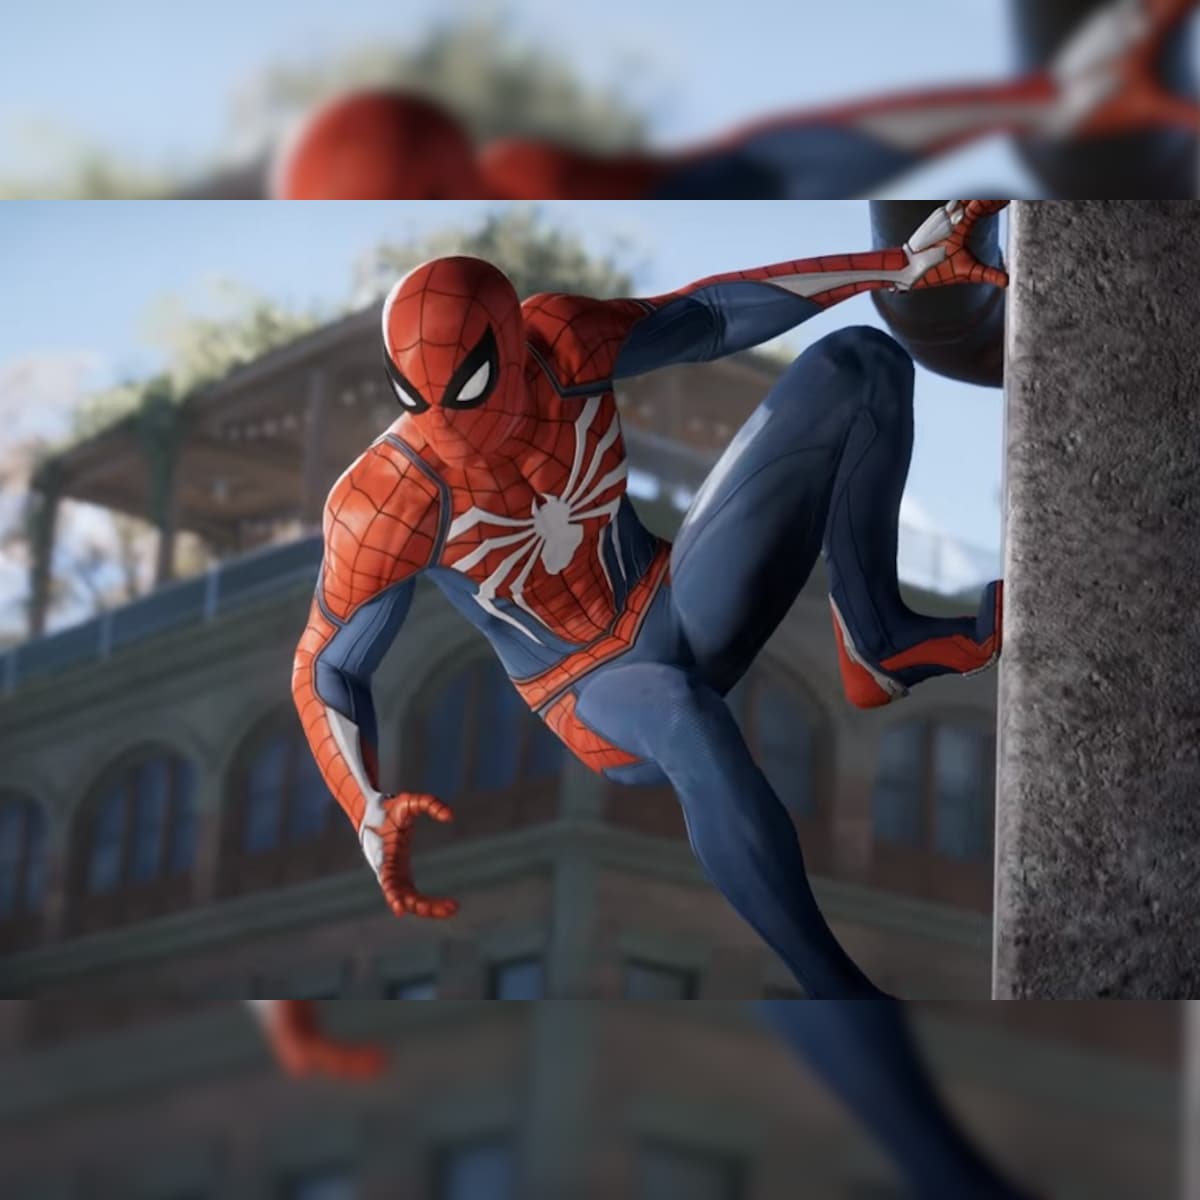 Four Major Happenings at The E3 2017: Xbox One X, Spider-Man, Ubisoft, Super  Mario Odyssey